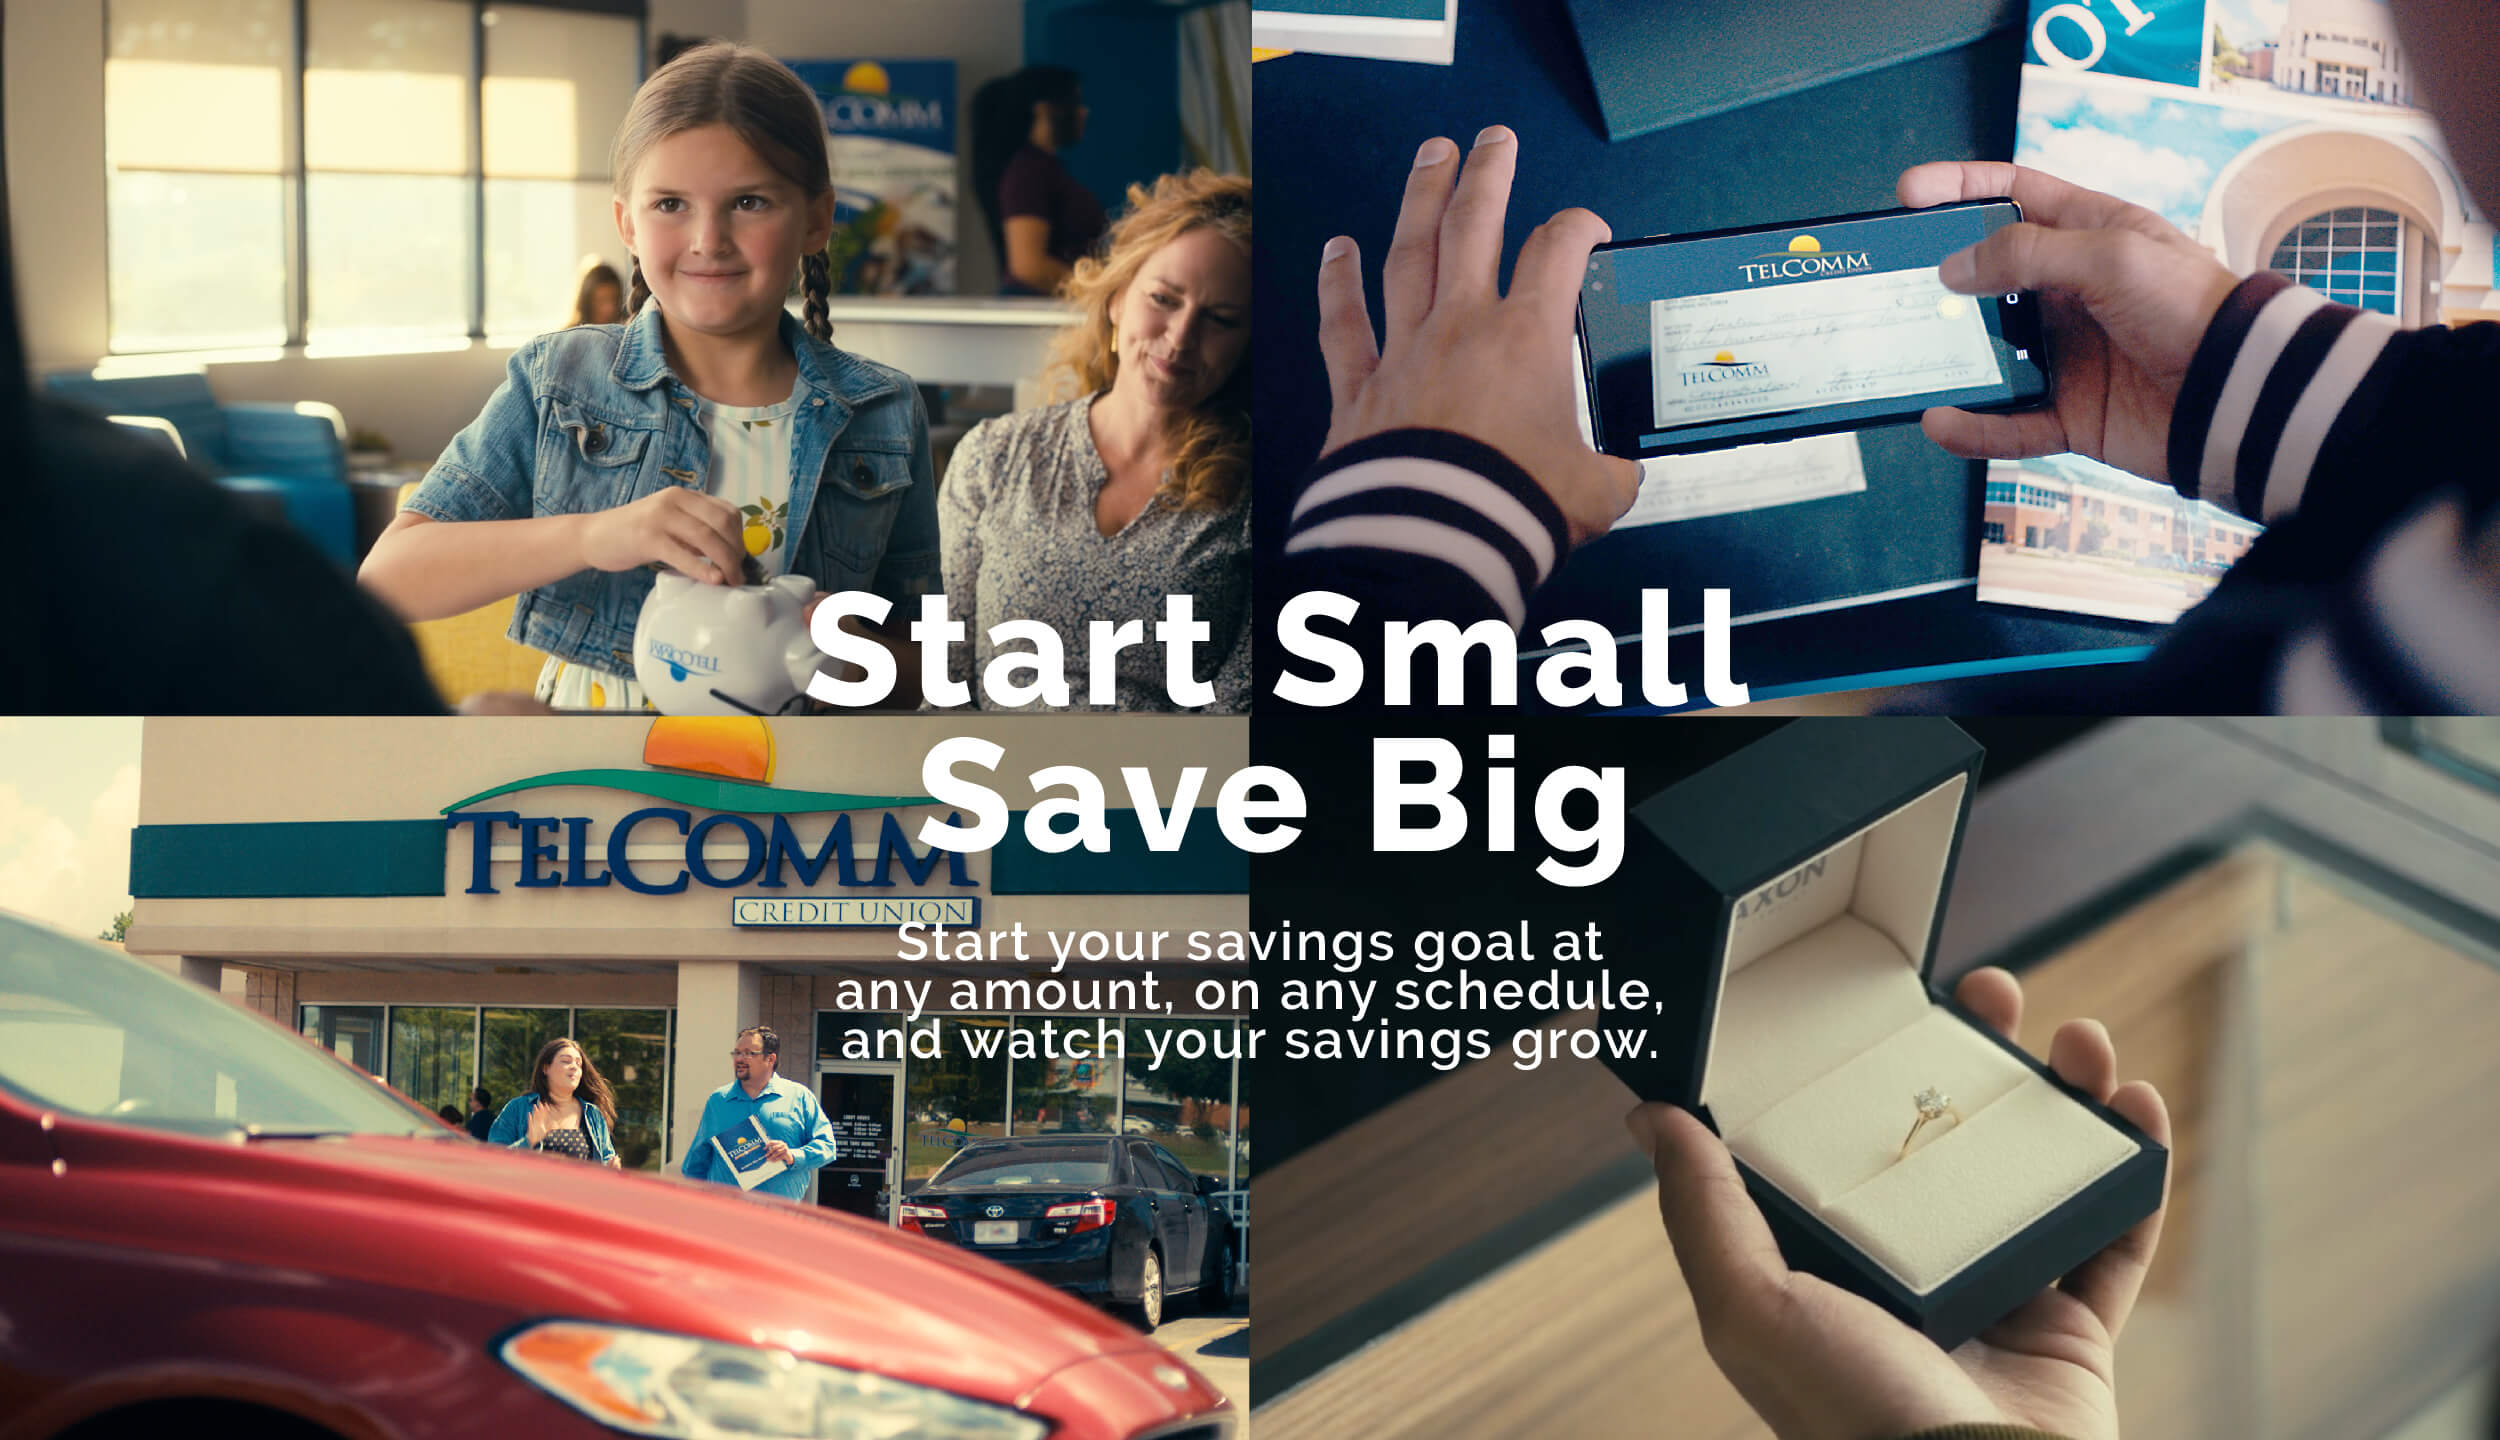 Start Small, Save Big. Start your savings goal at any amount, on any schedule, and watch your savings grow.